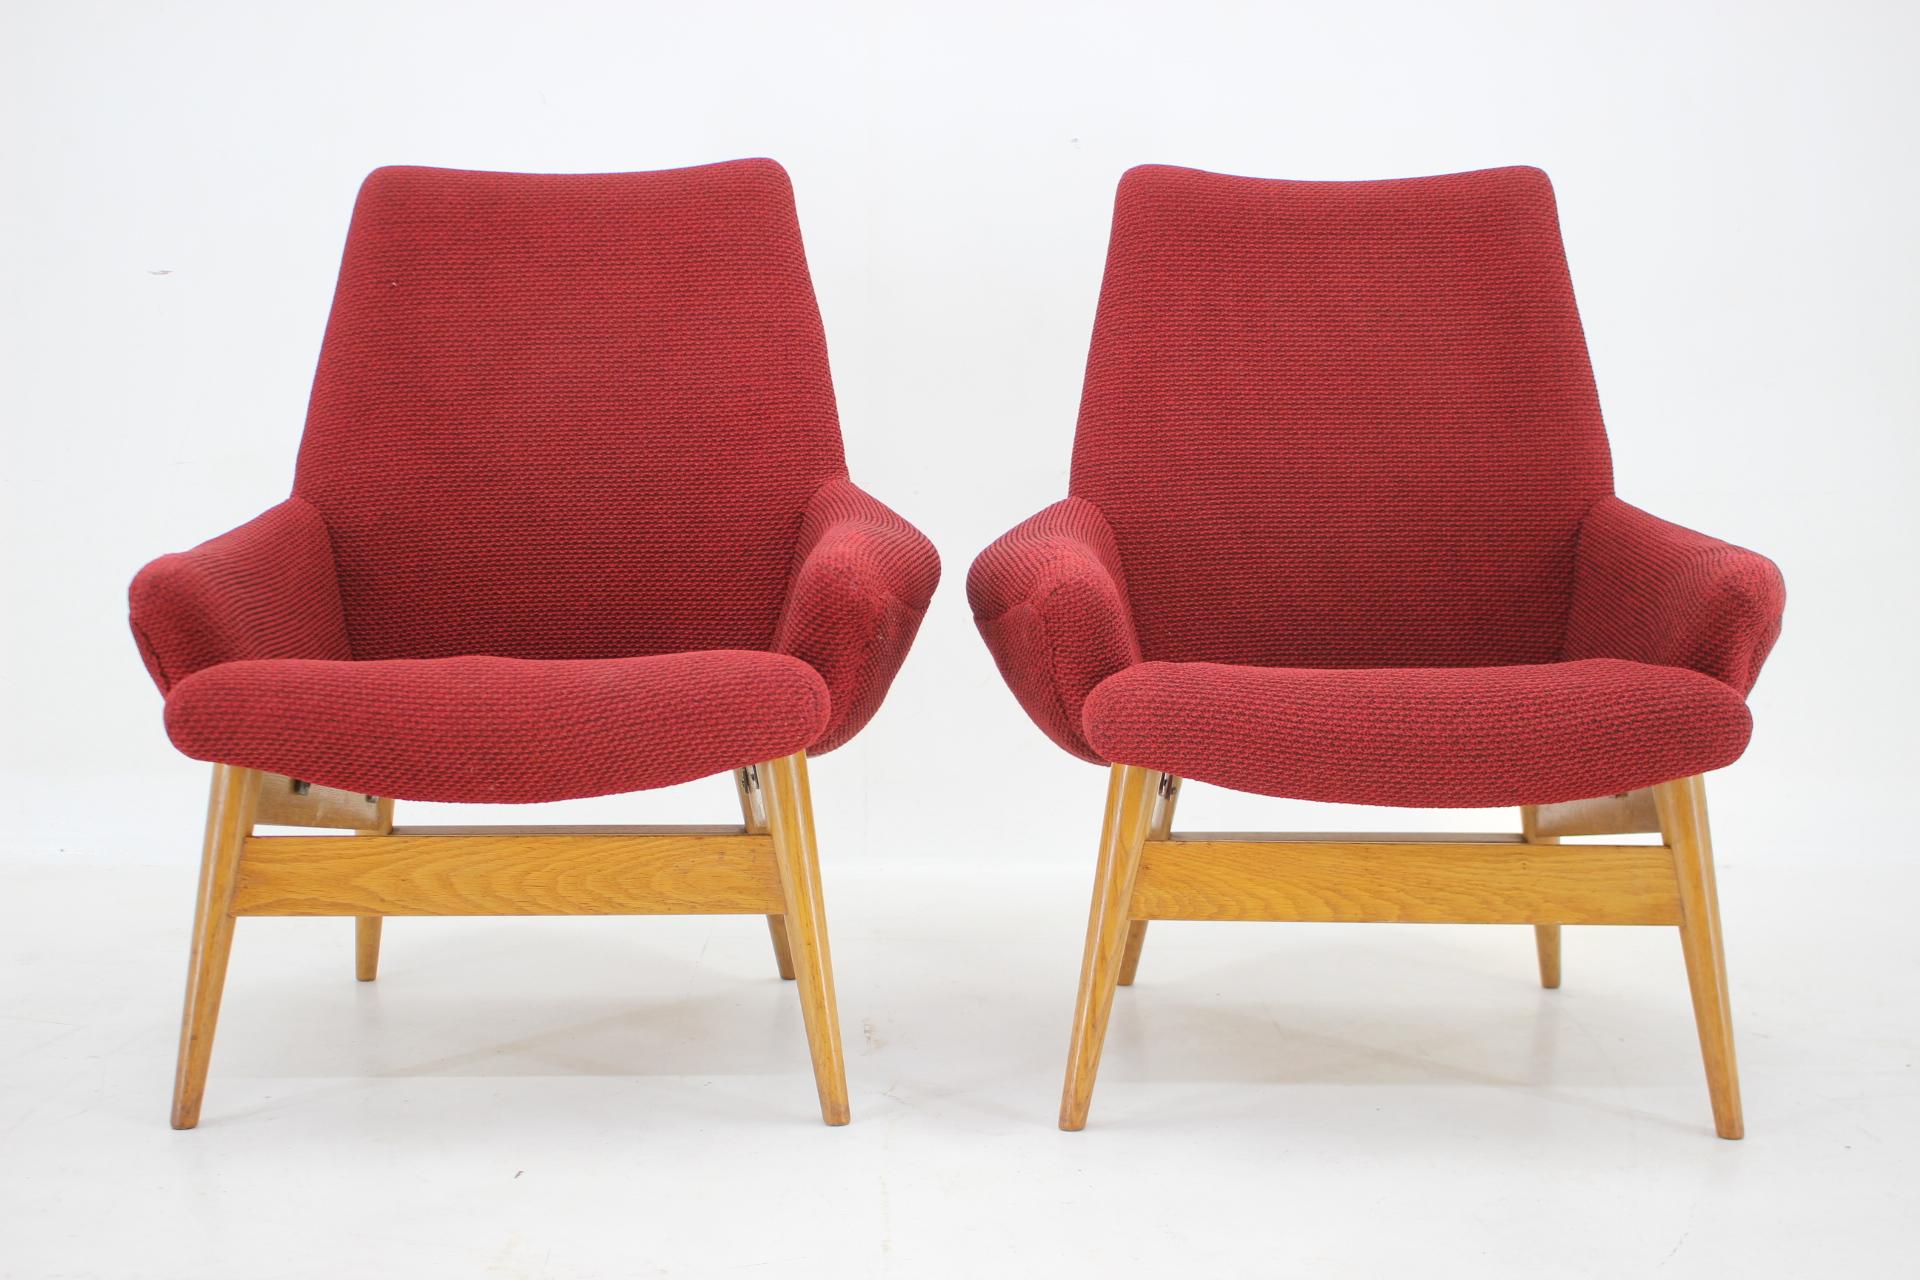 1960s, Pair of Miroslav Navratil Lounge Chairs, Czechoslovakia In Good Condition For Sale In Praha, CZ